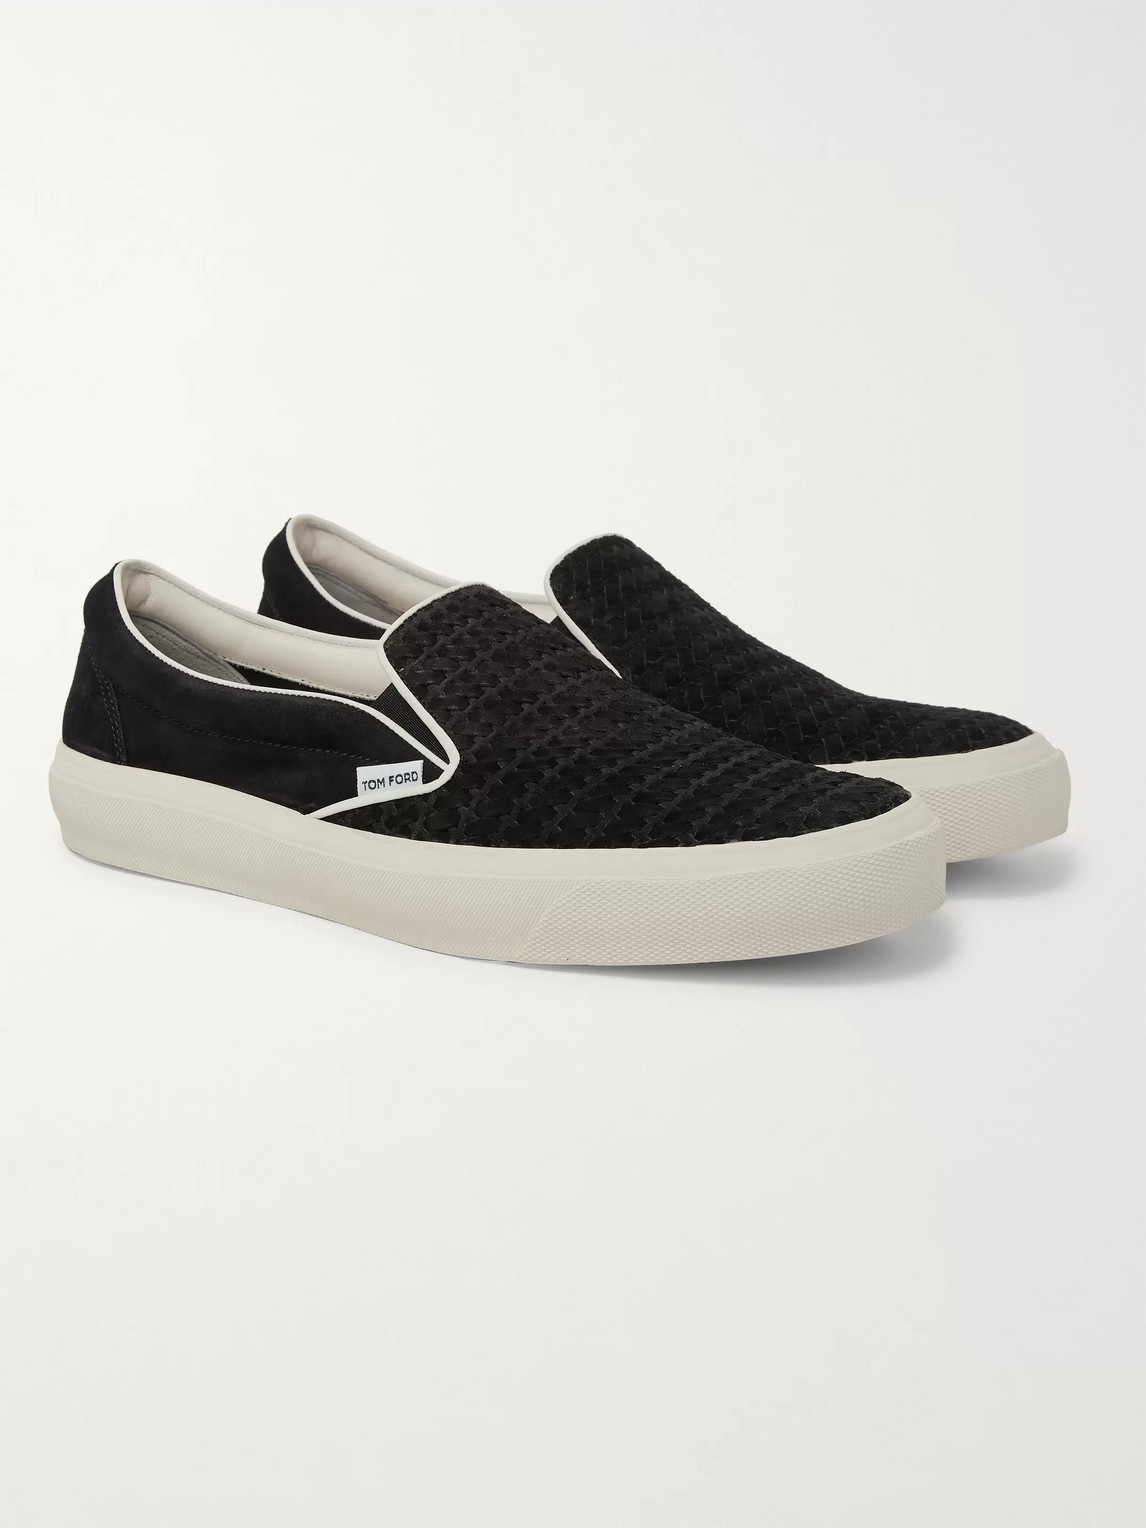 Tom Ford Cambridge Leather-trimmed Woven Suede Slip-on Trainers In Black